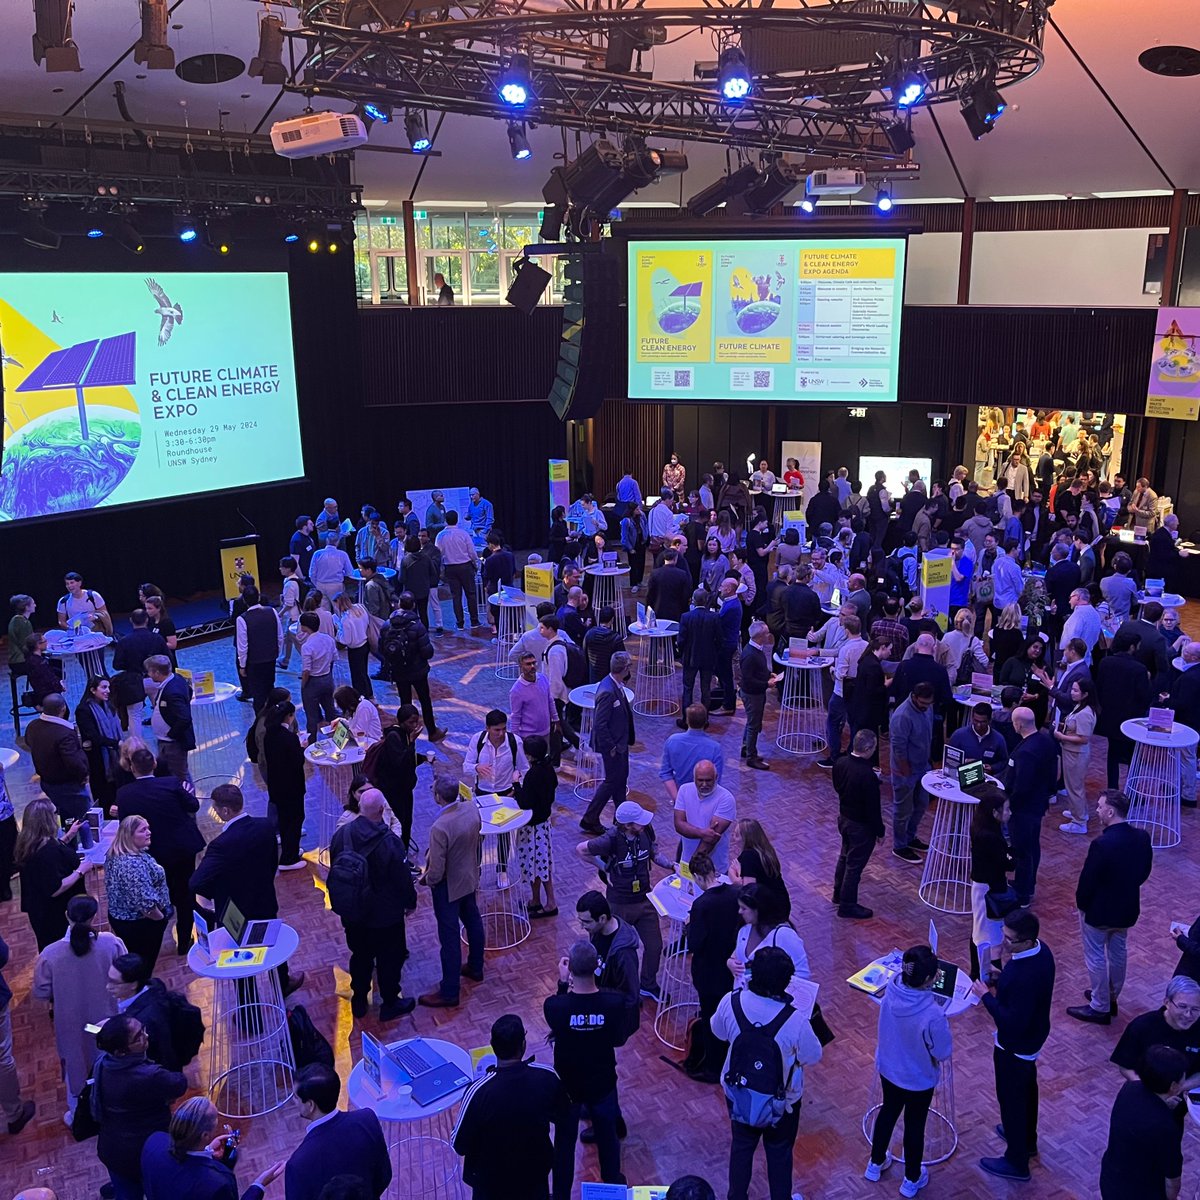 1/2 It was fantastic to see so many people networking and learning more about some of the cutting-edge research in the climate and energy space at the UNSW Future Climate & Clean Energy Expo♻️